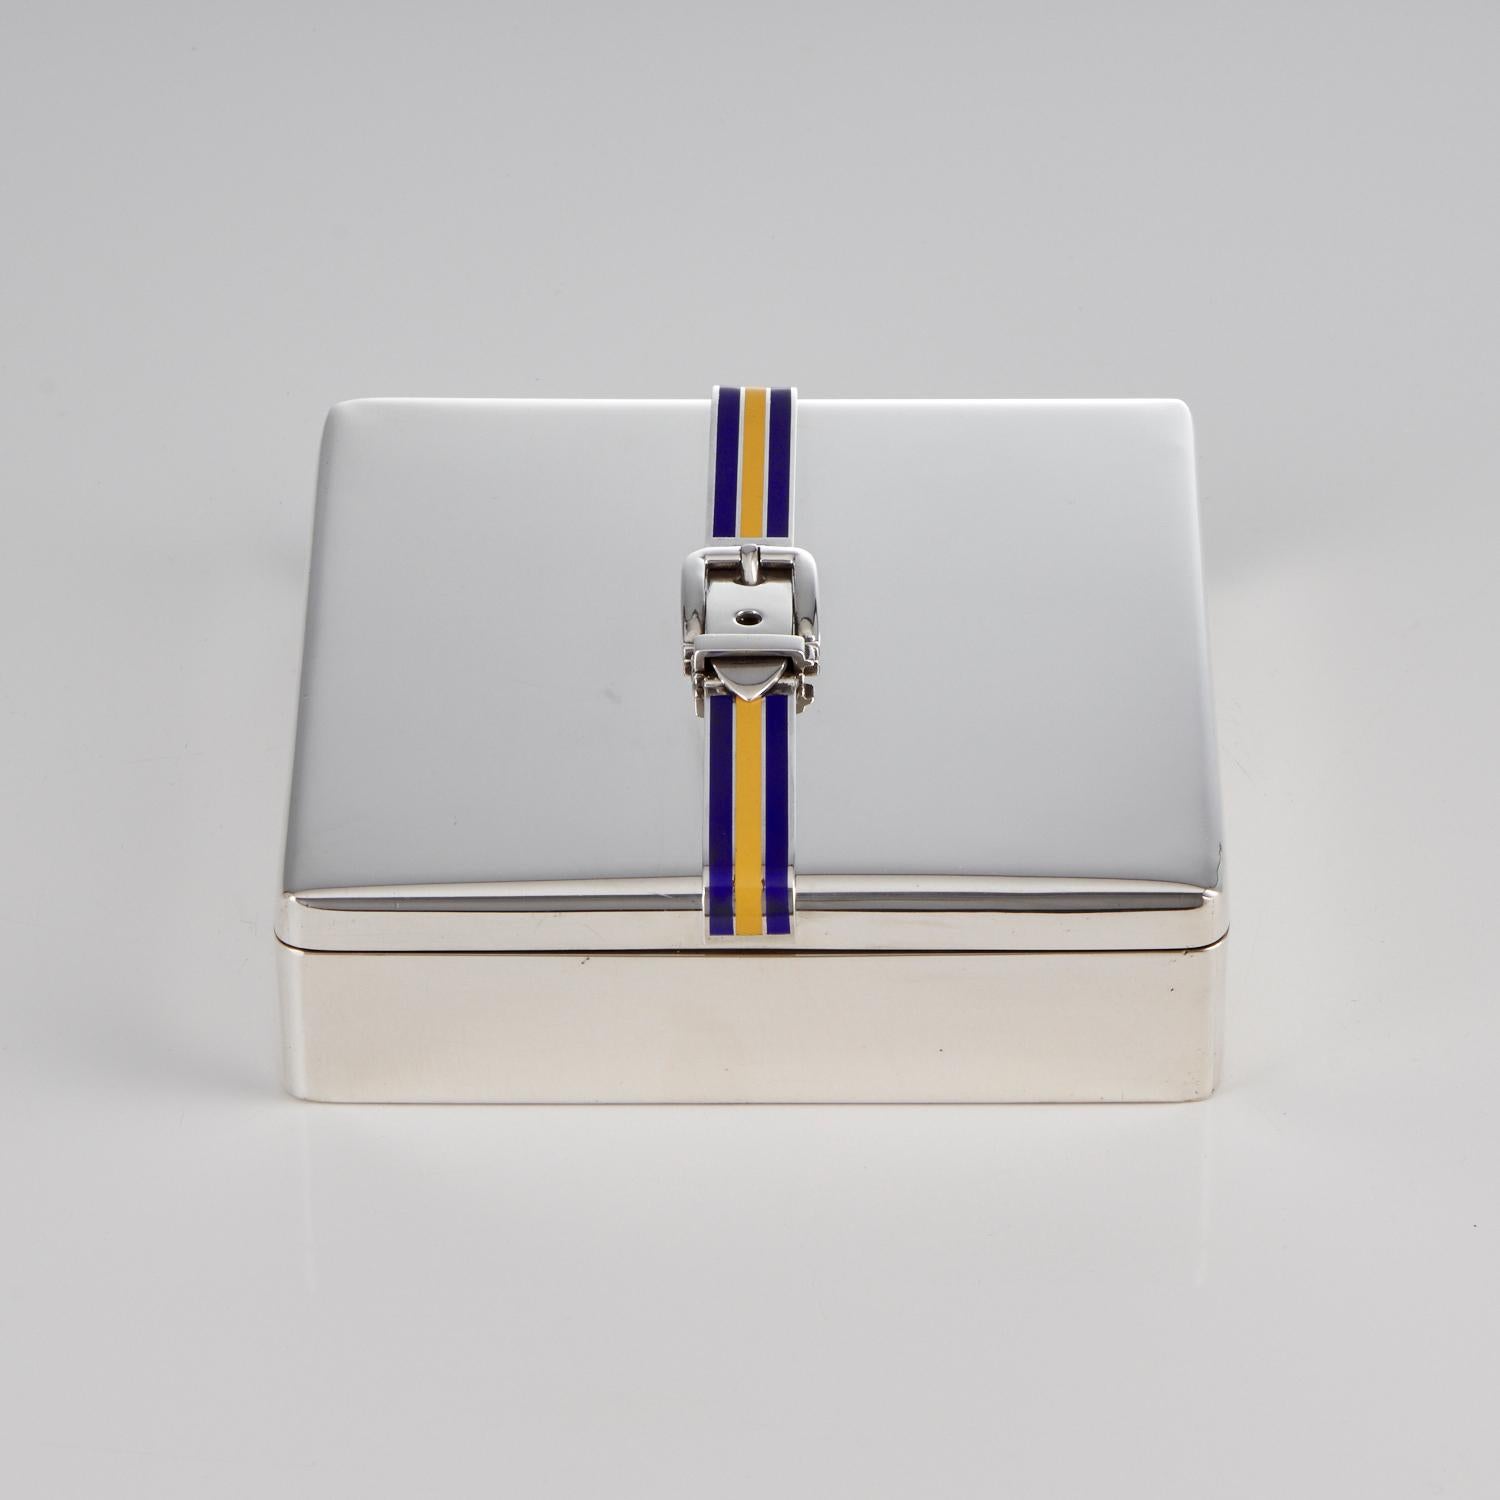 An Italian 925 sterling silver & enamel box circa 1960

This box features both stunning quality and design. Both the silver & enamel are in immaculate condition and the buckle decoration is so realistic that it gives the appearance it could